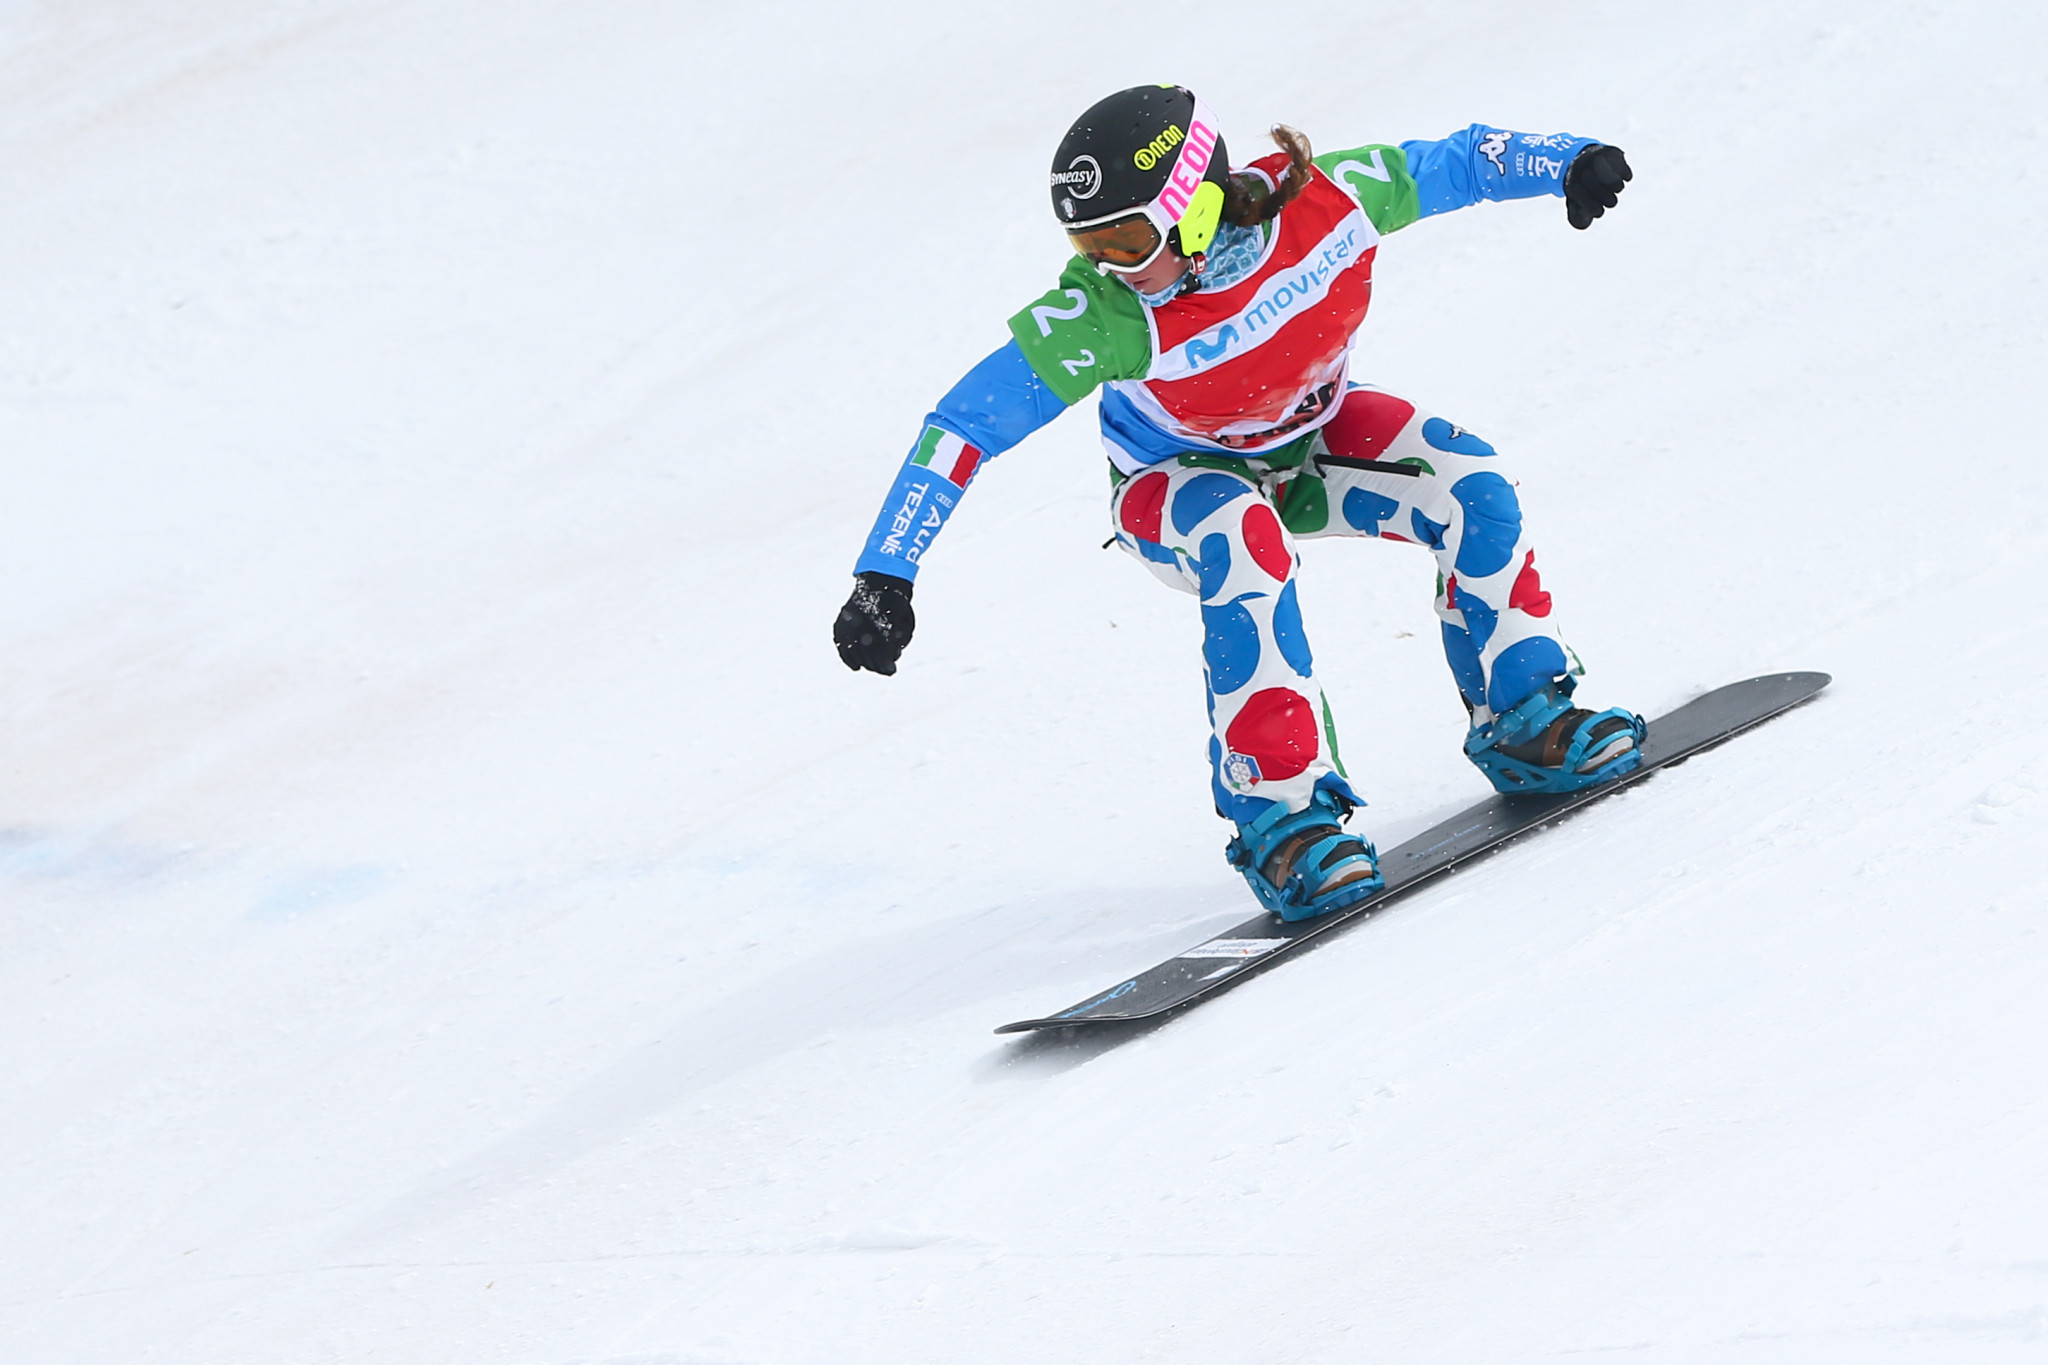 Snowboard Cross World Cup set to continue in Germany